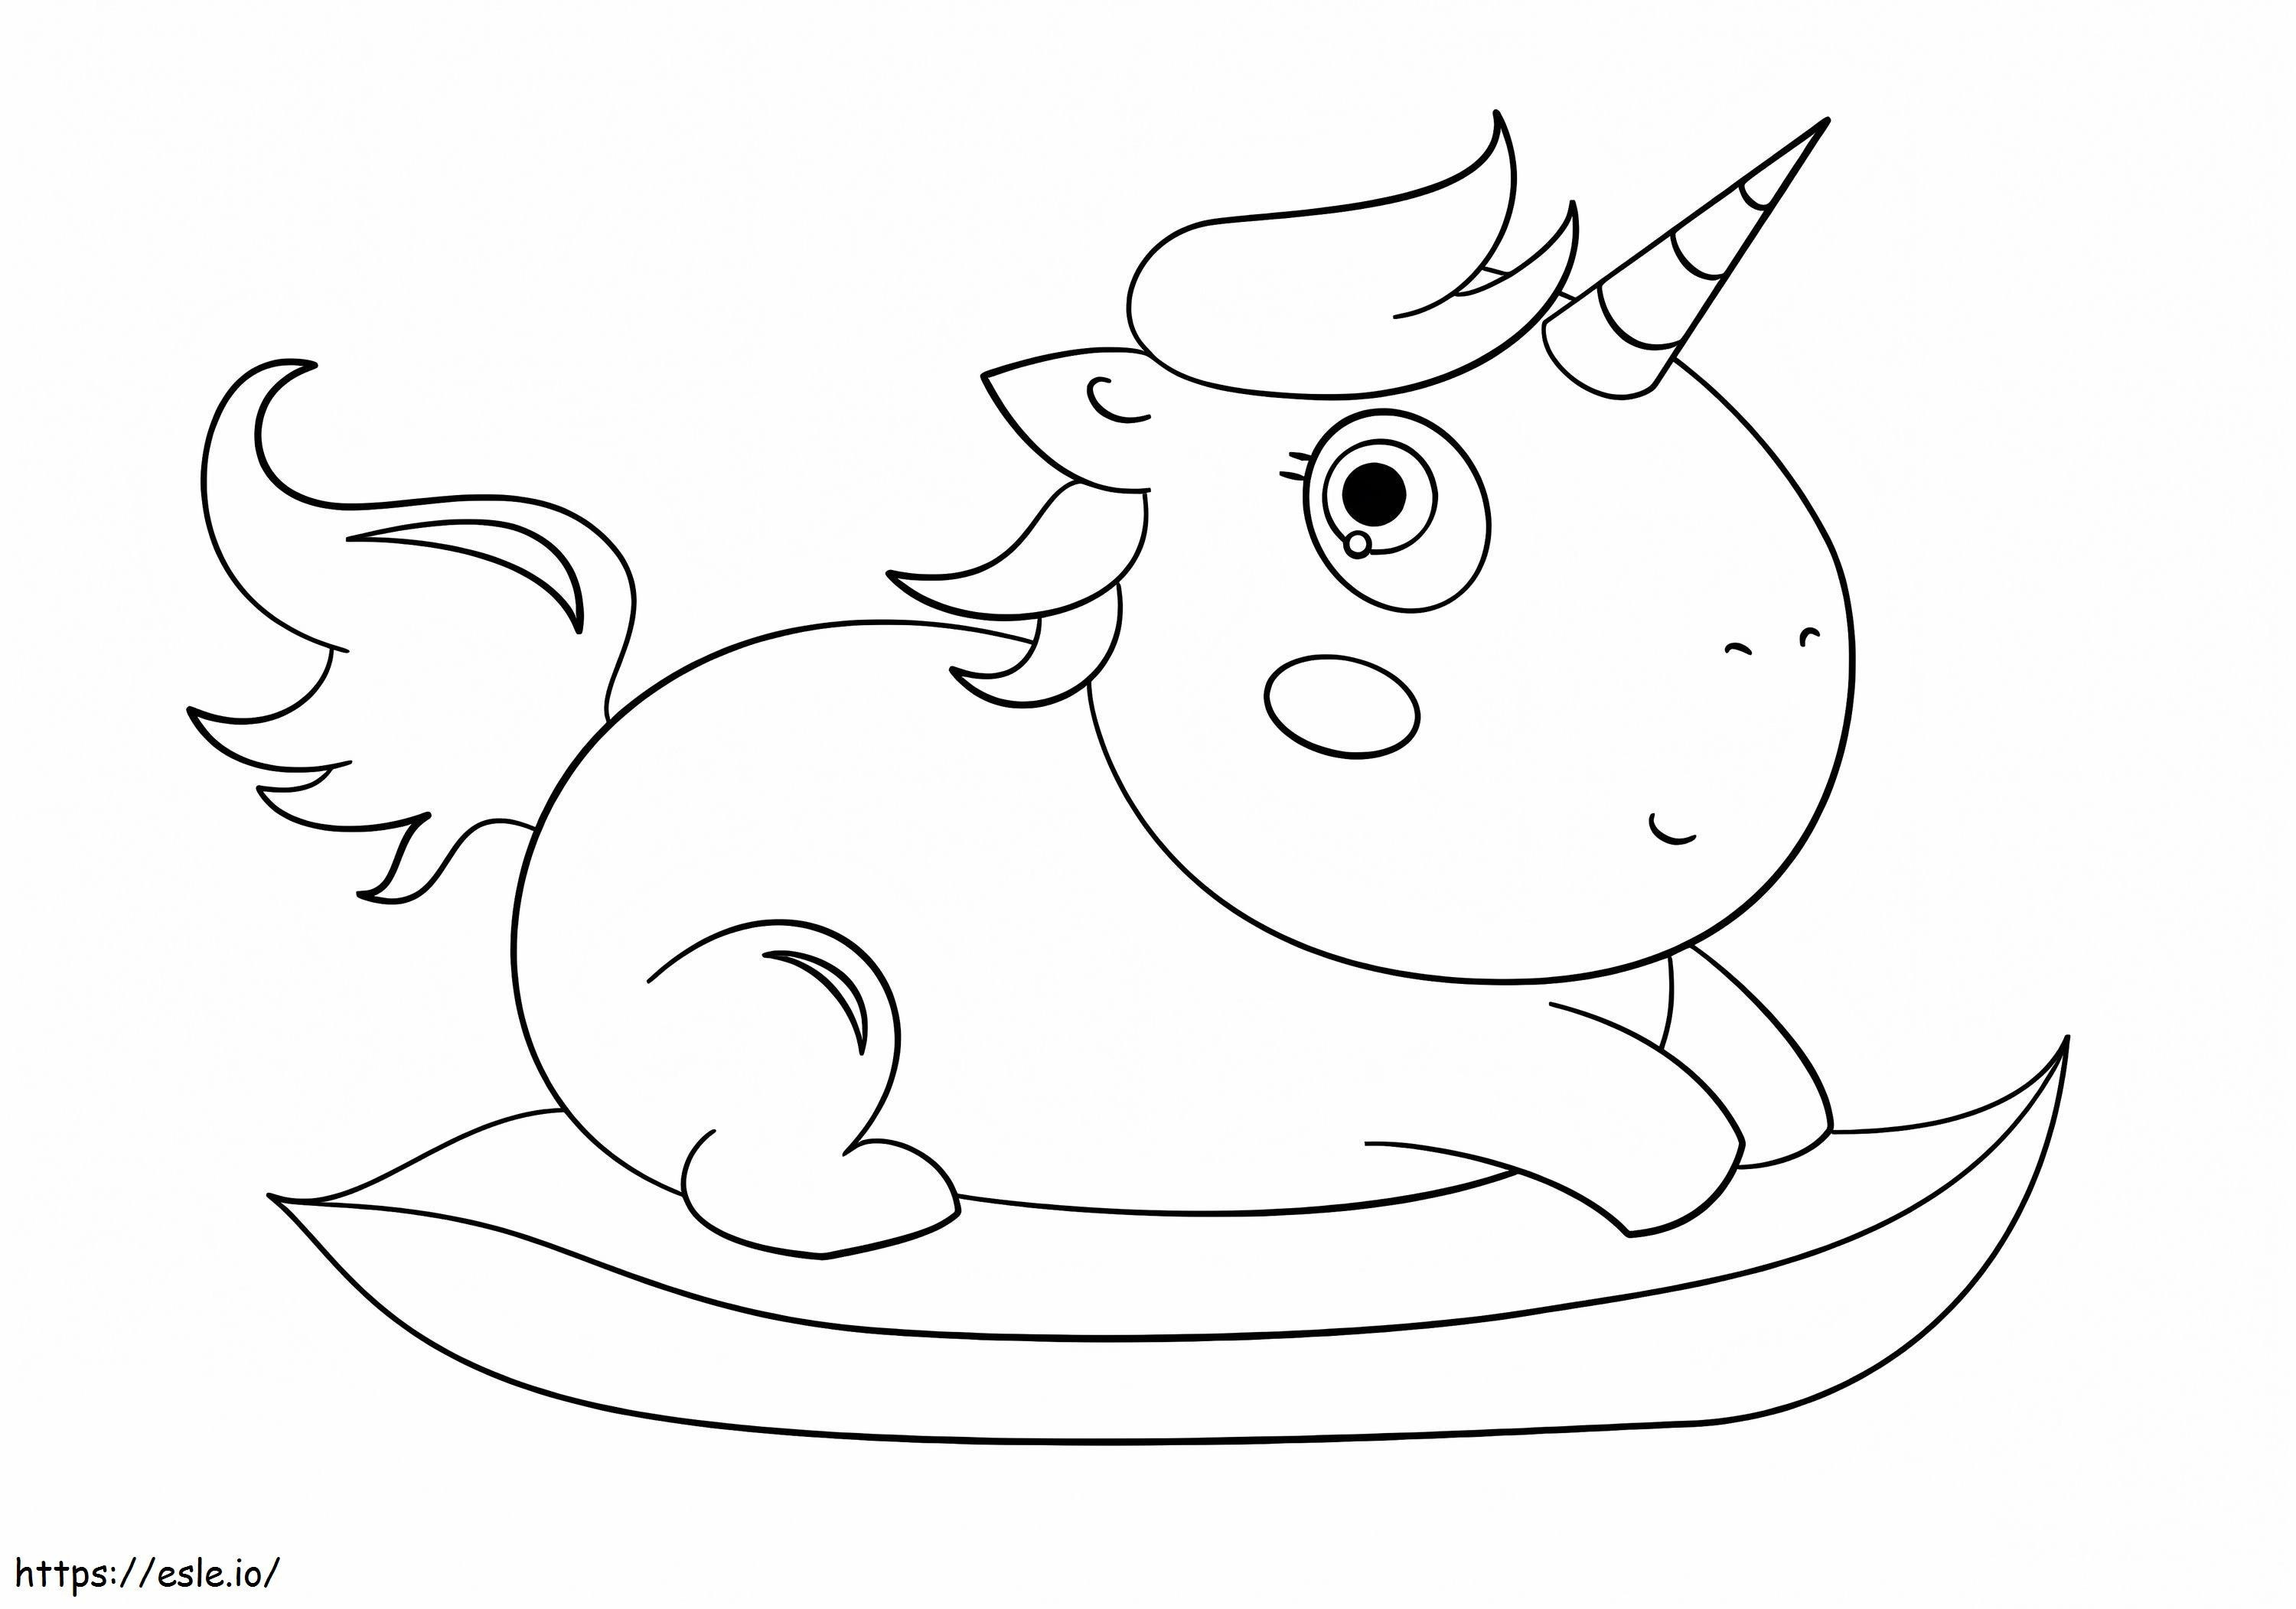 Cute Fat Unicorn On Leaf coloring page